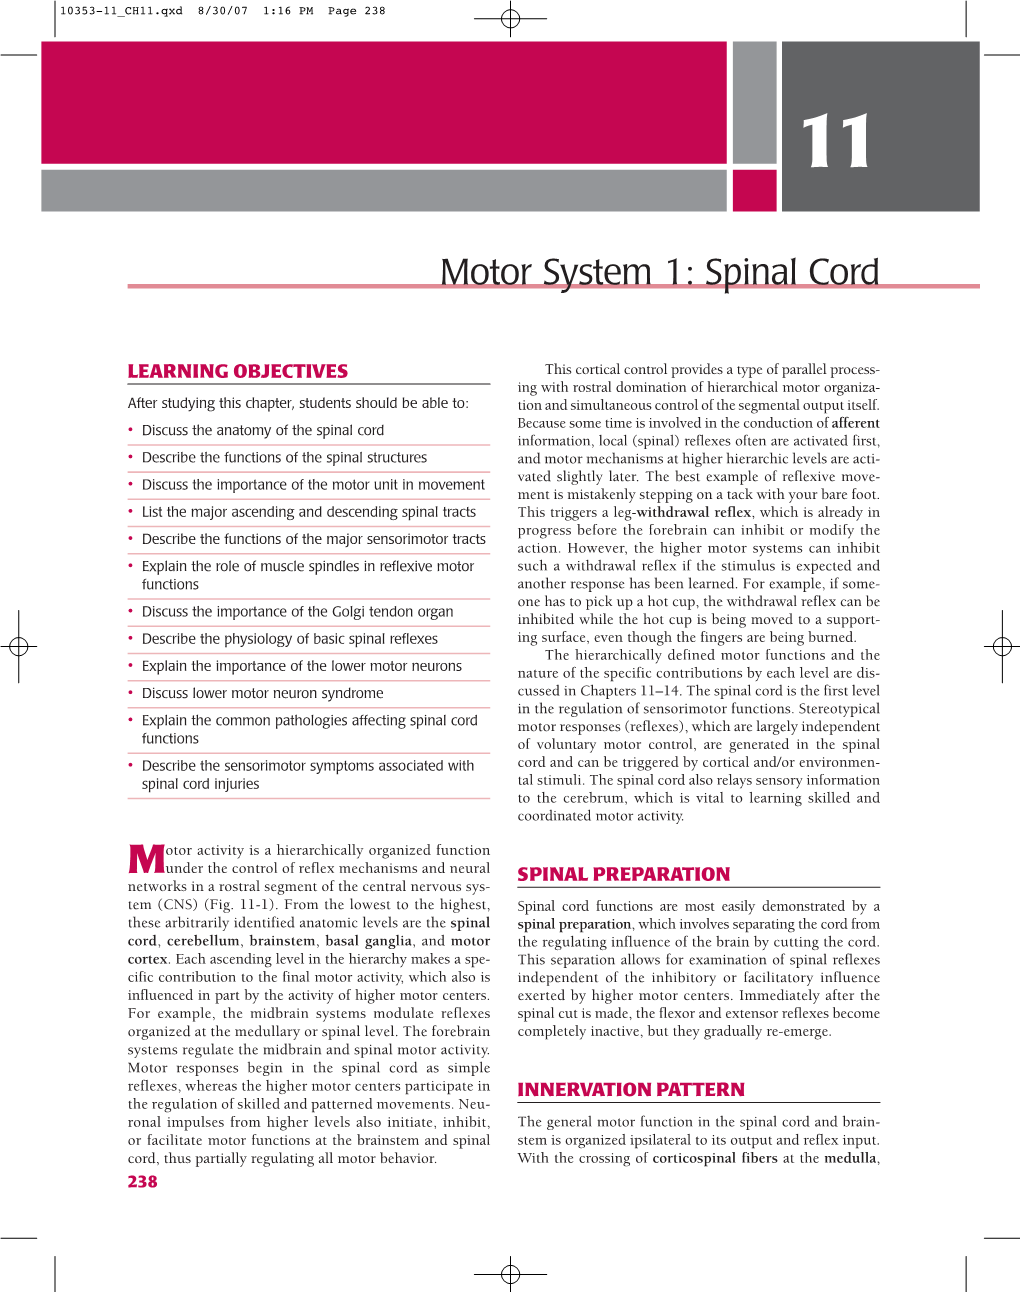 Motor System 1: Spinal Cord